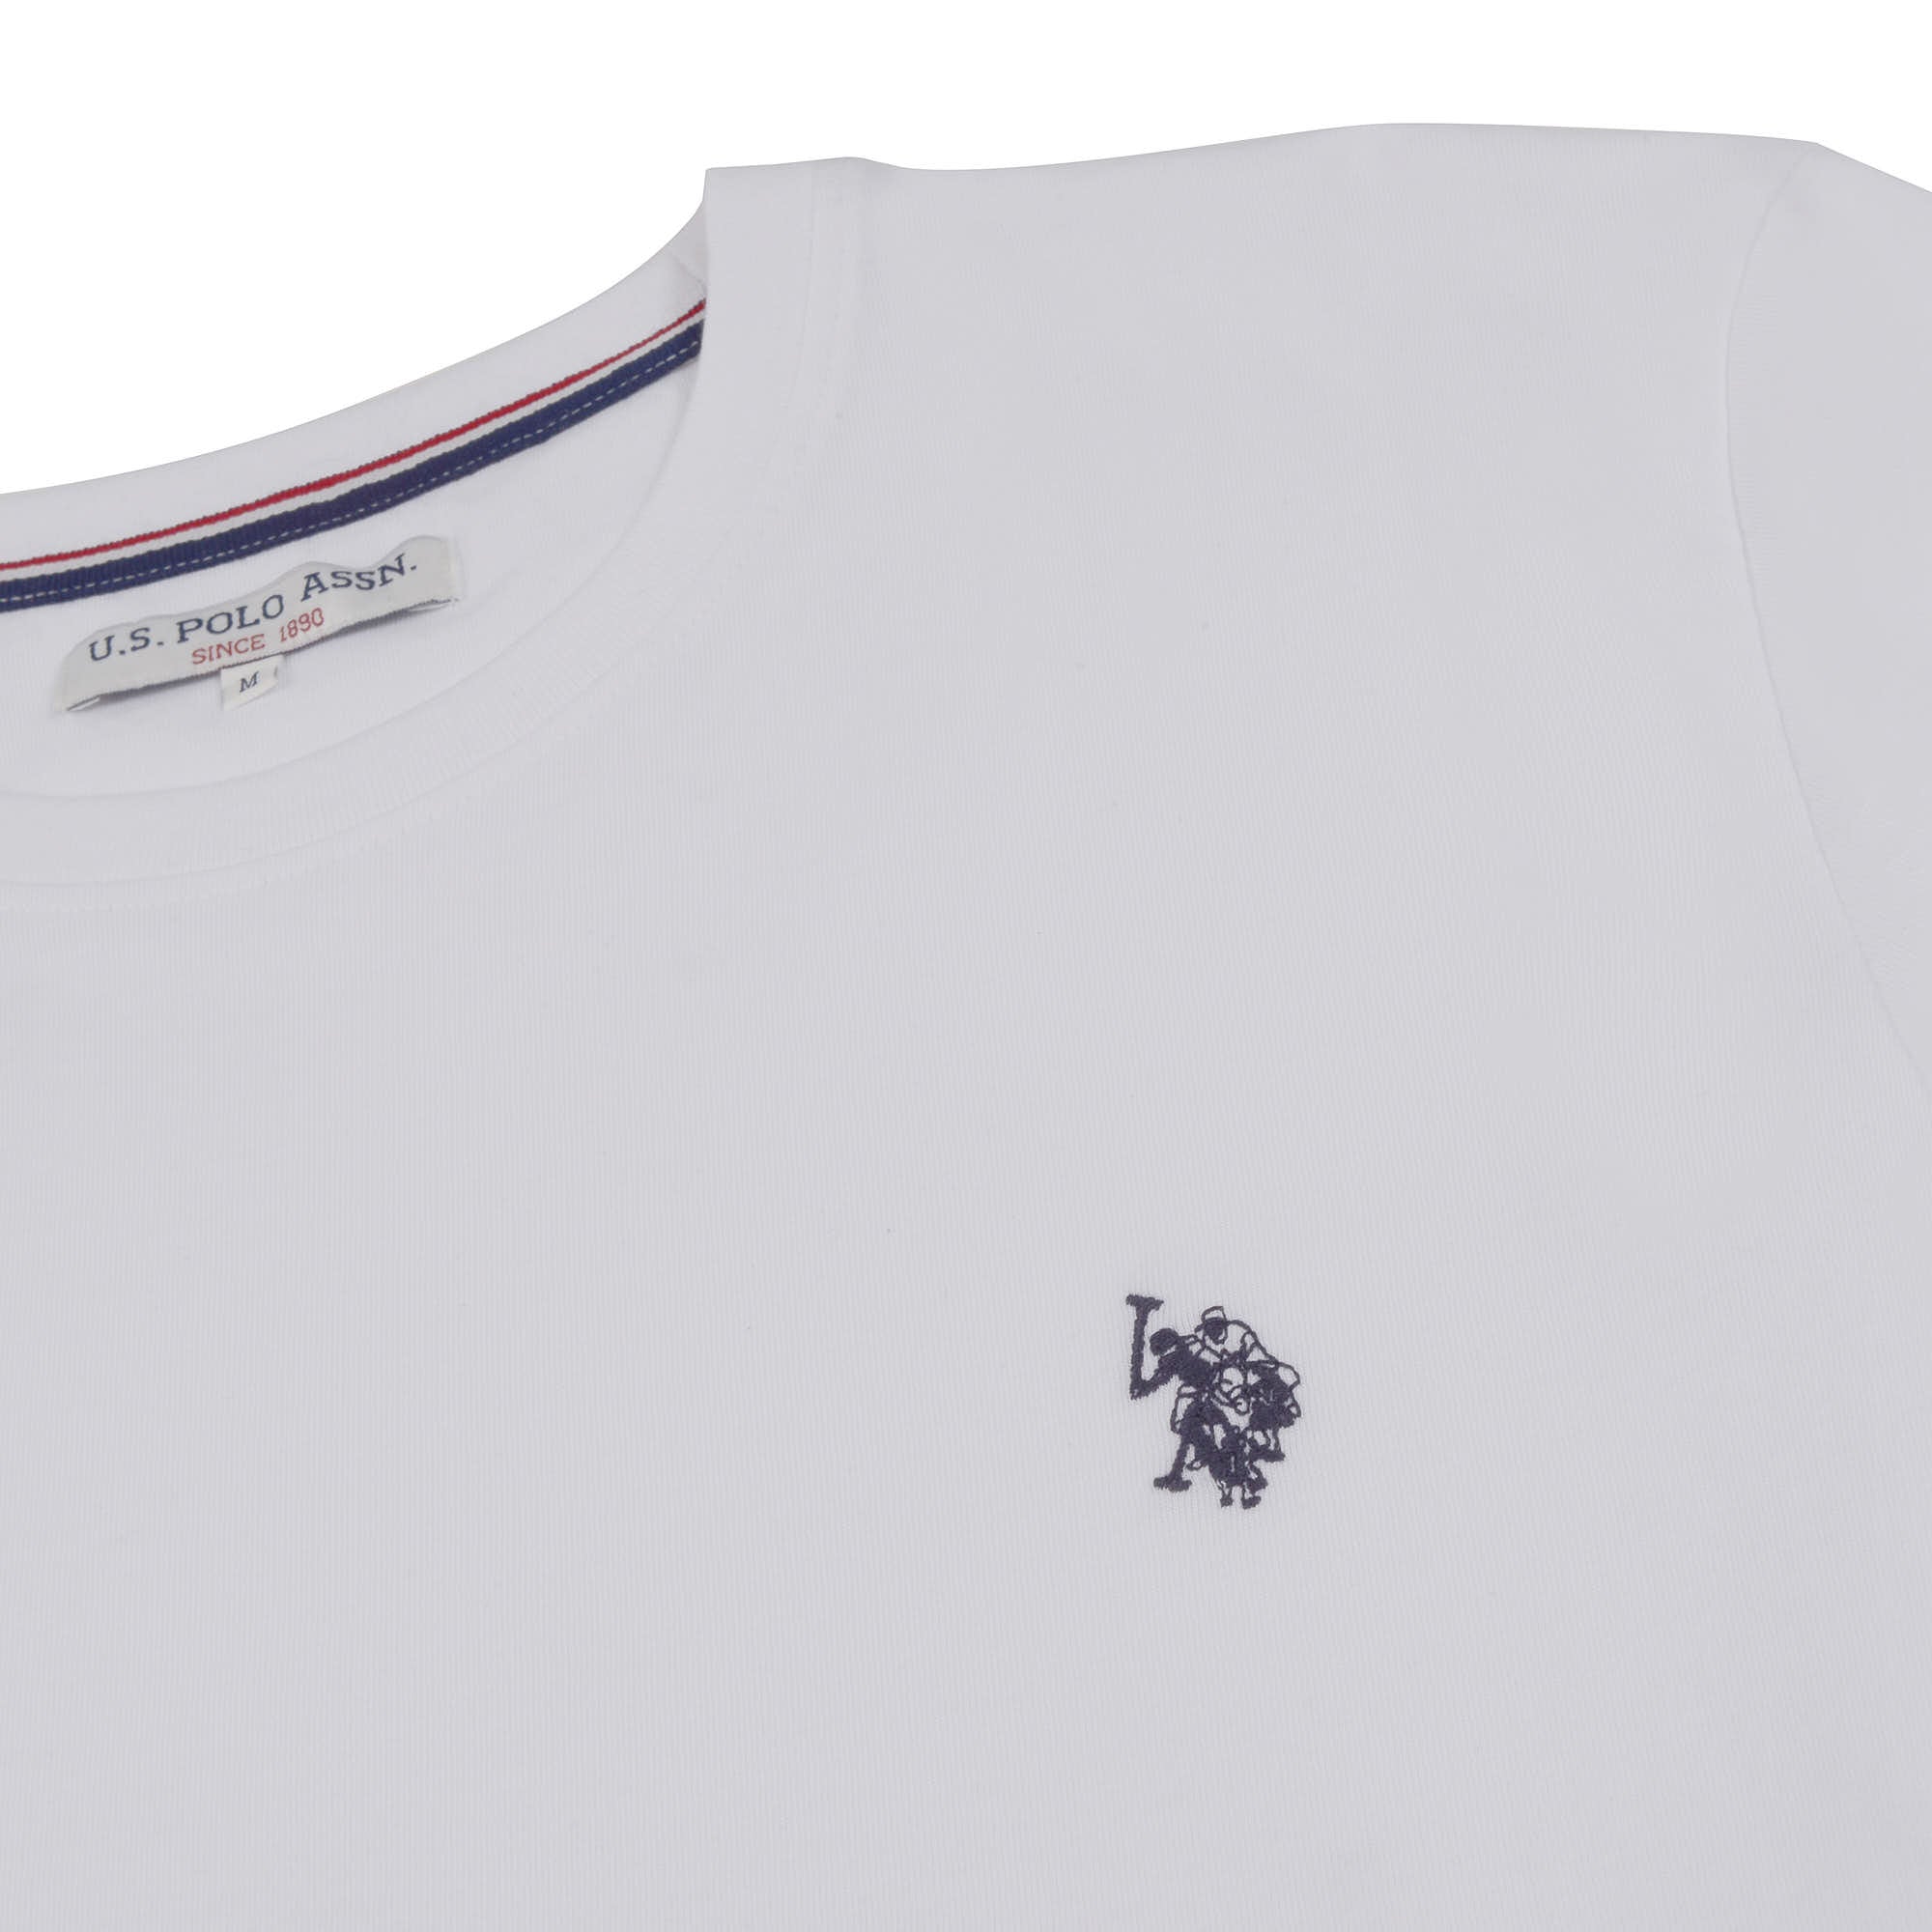 Mens Classic T-Shirt in Bright White